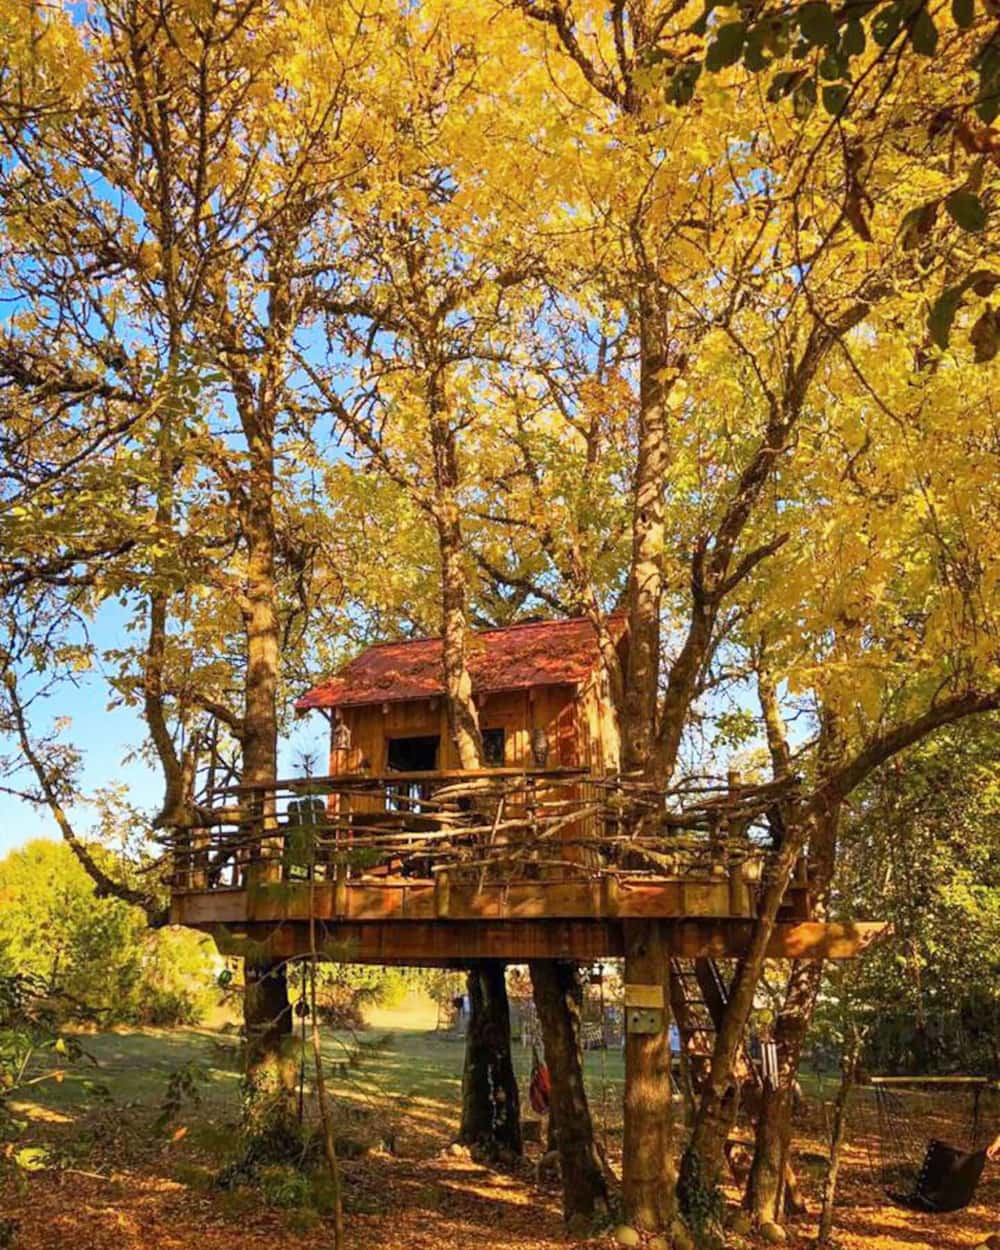 20 Magical Oregon Treehouses You Can Rent - Renee Roaming